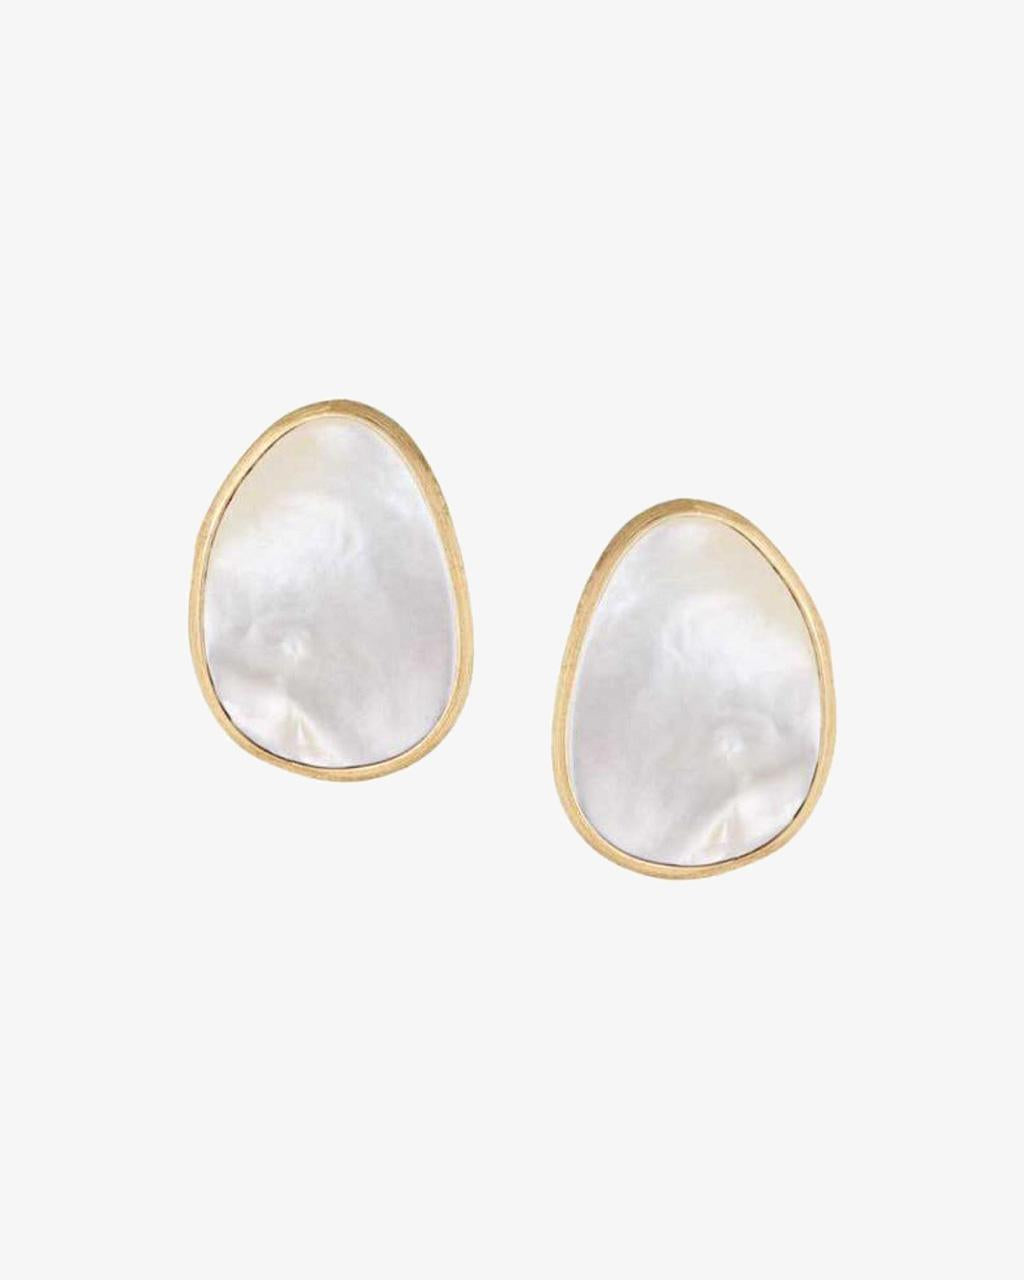 Marco Bicego Lunaria Collection Mother of Pearl Stud Earrings